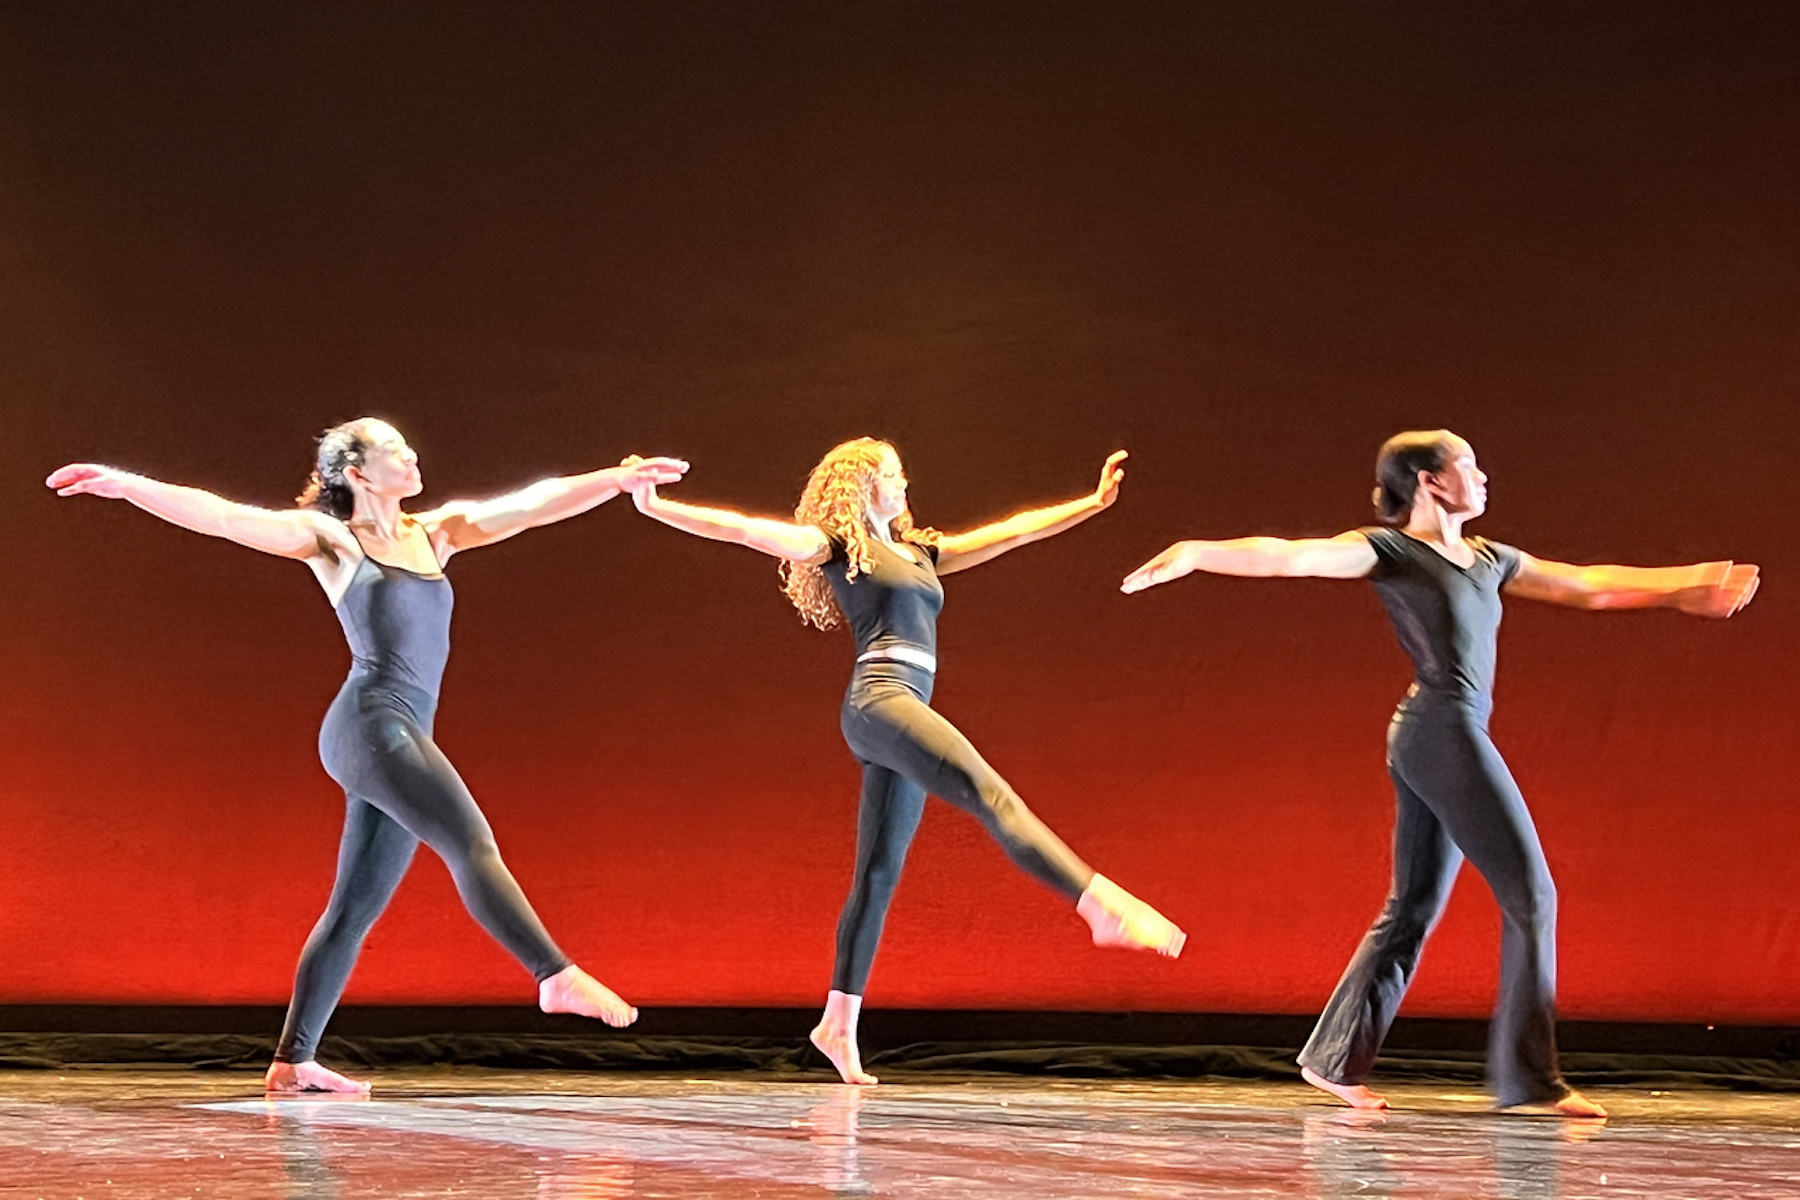 Three Fieldston Upper dancers perform on stage, wearing all black; the stage lighting is a dark red tone.